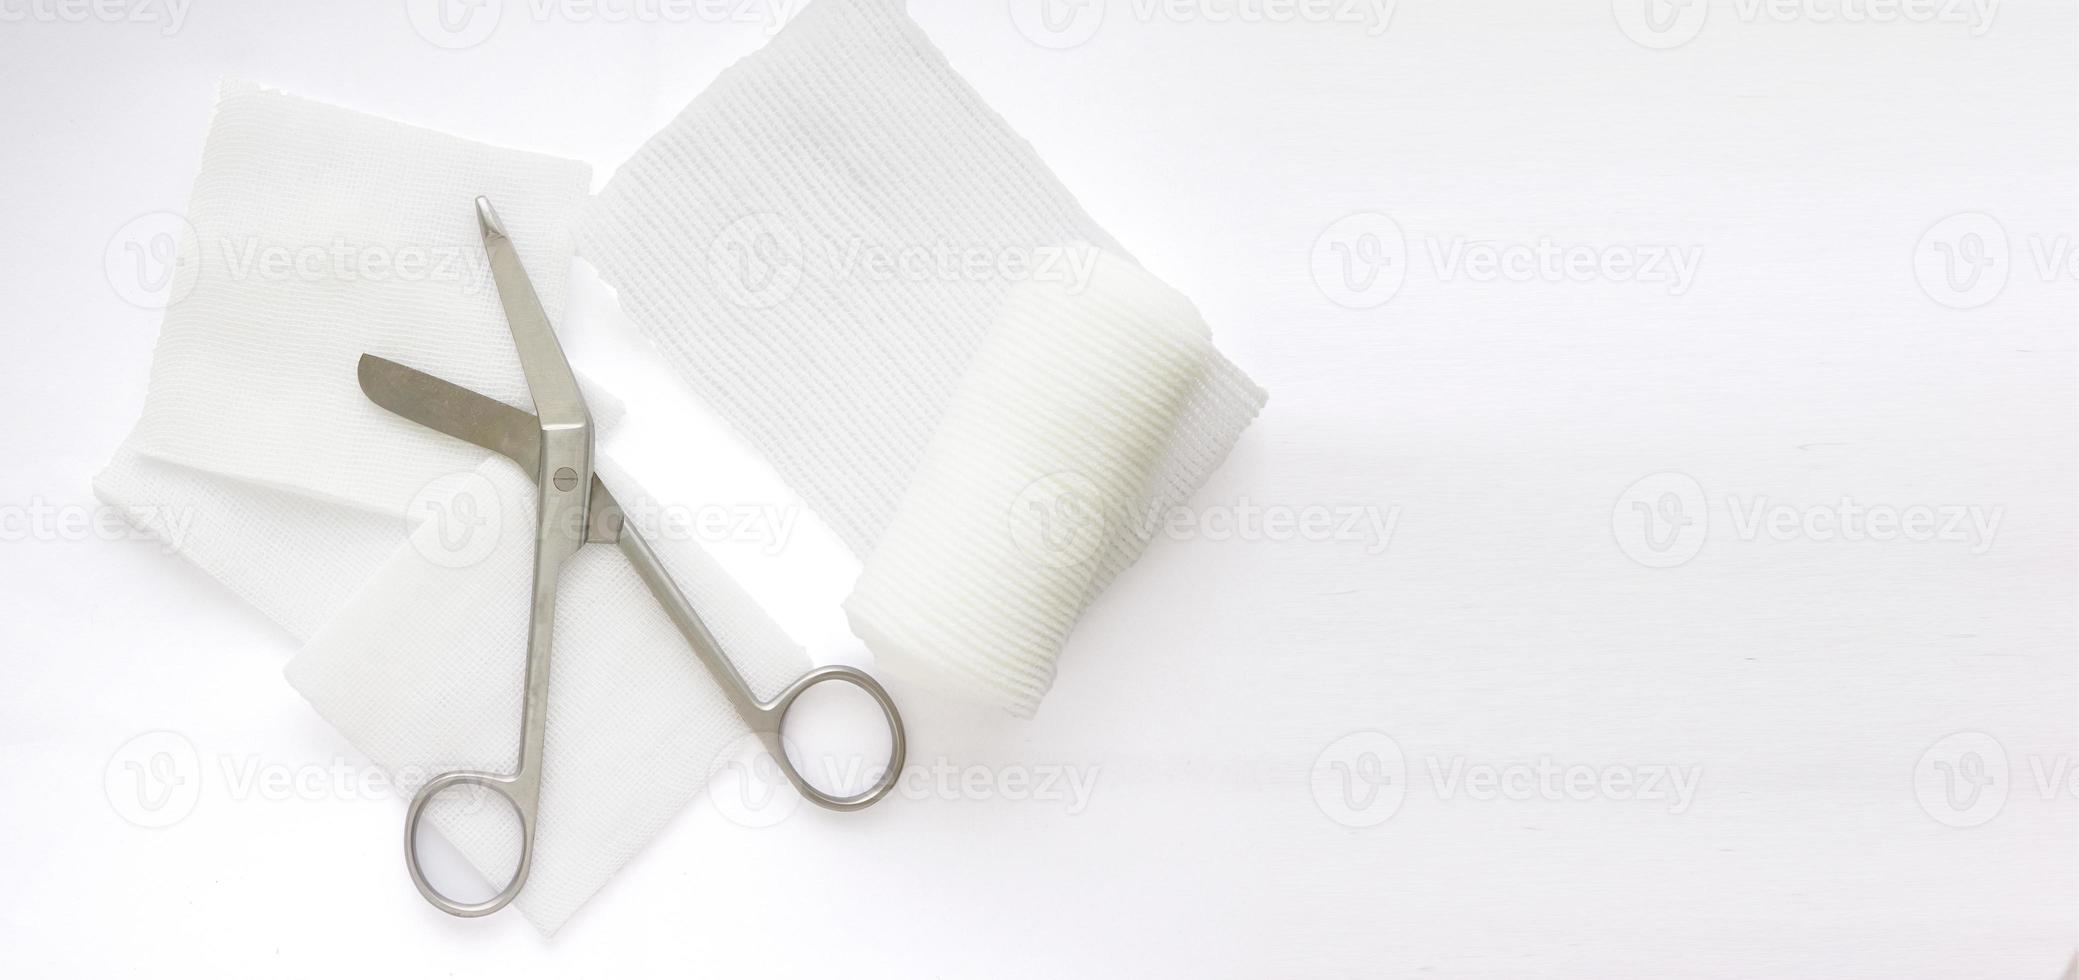 Gauzes, scissors and roll gauze on white background,closed up photo